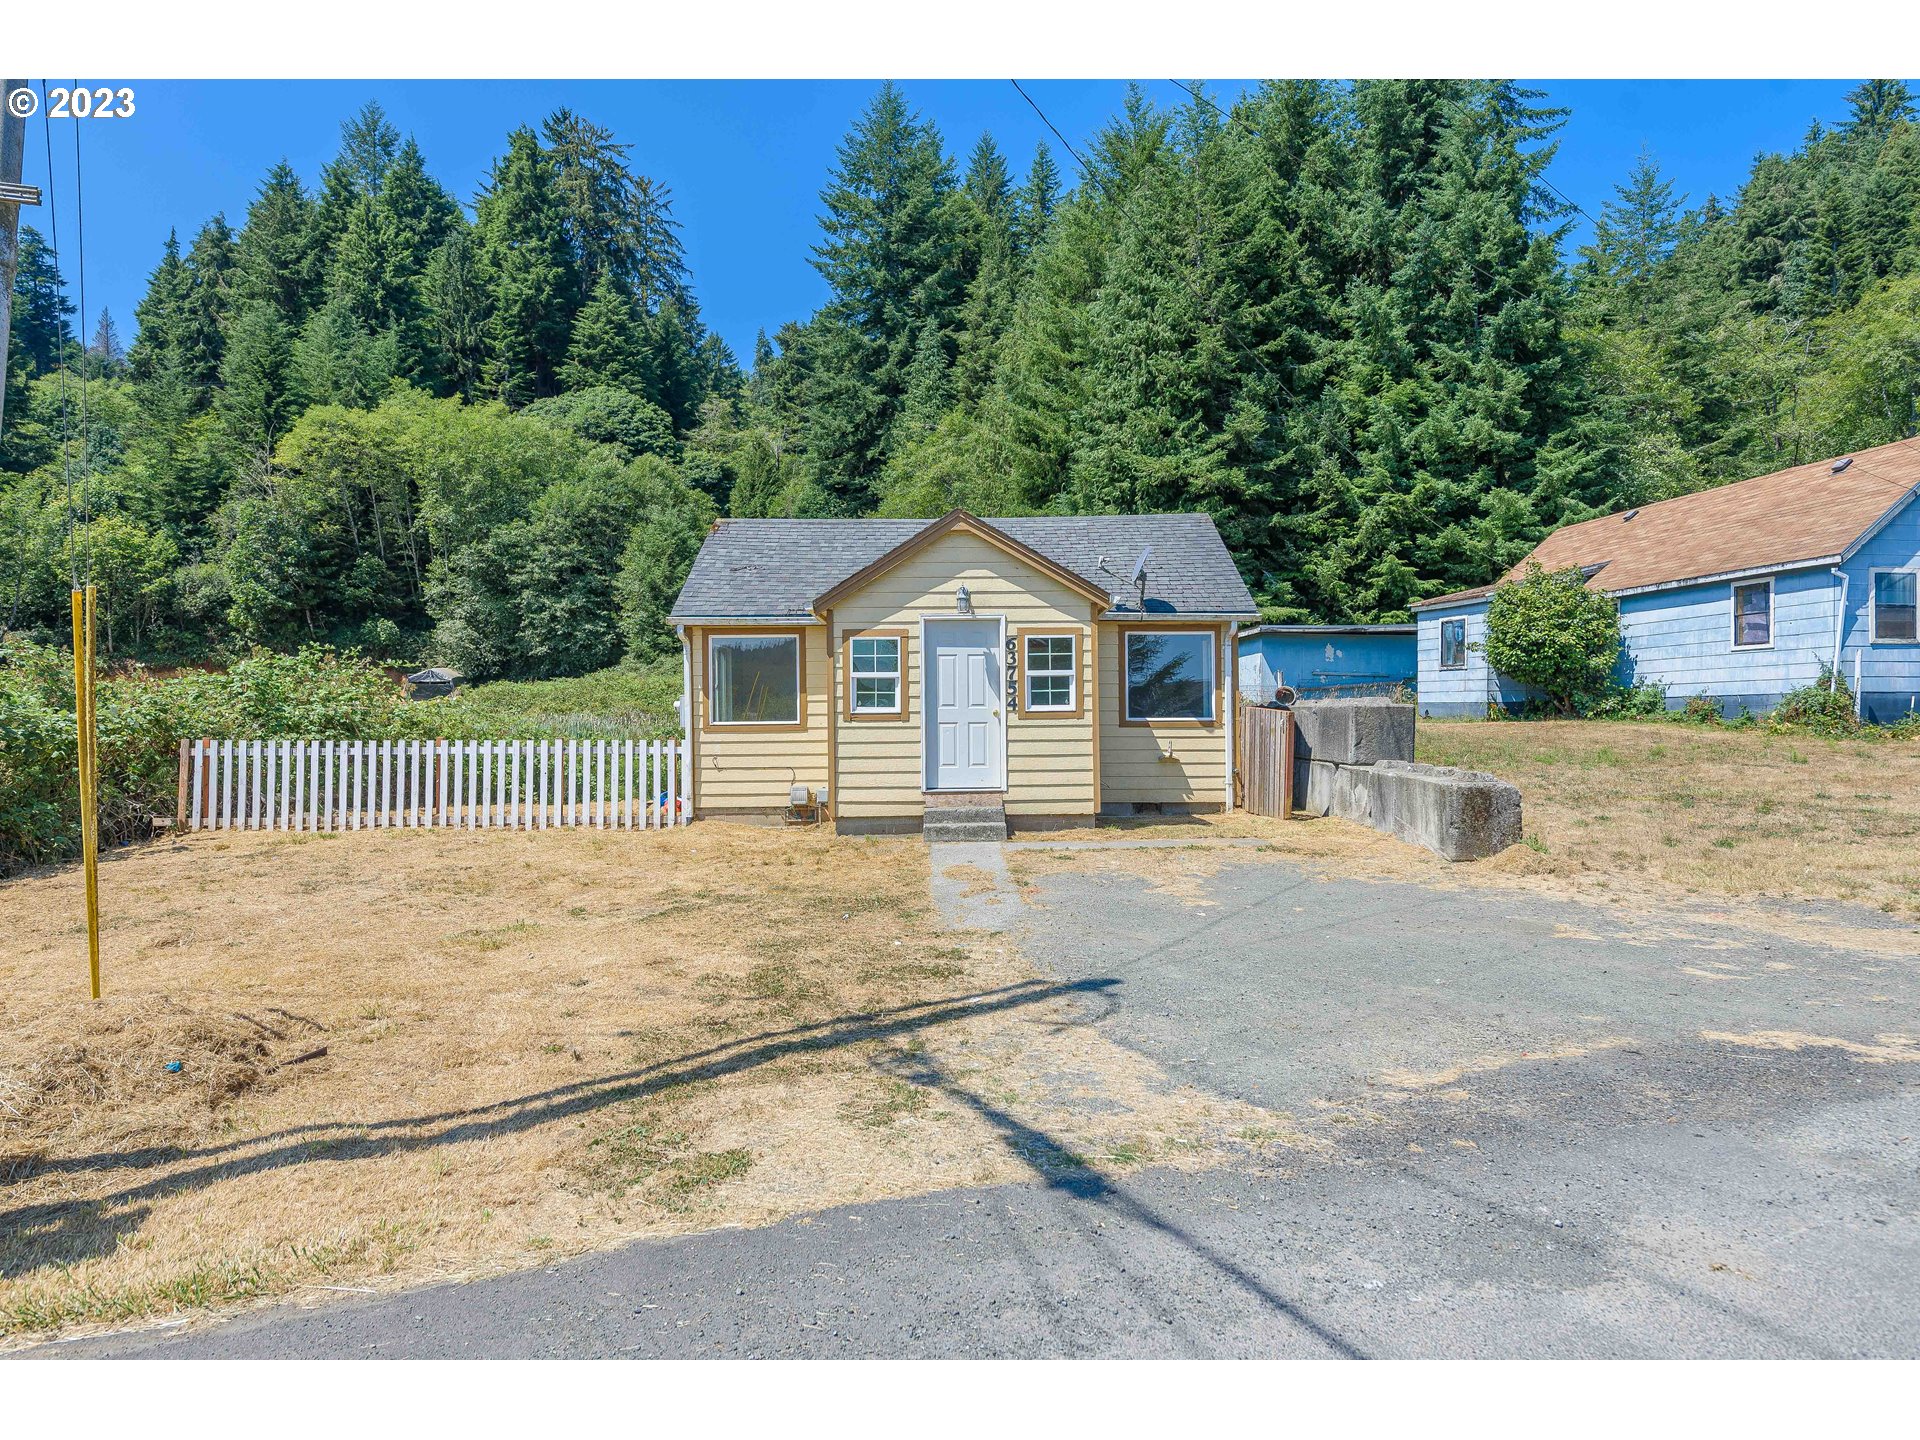 63754 ROSS INLET RD, Coos Bay, OR 97420